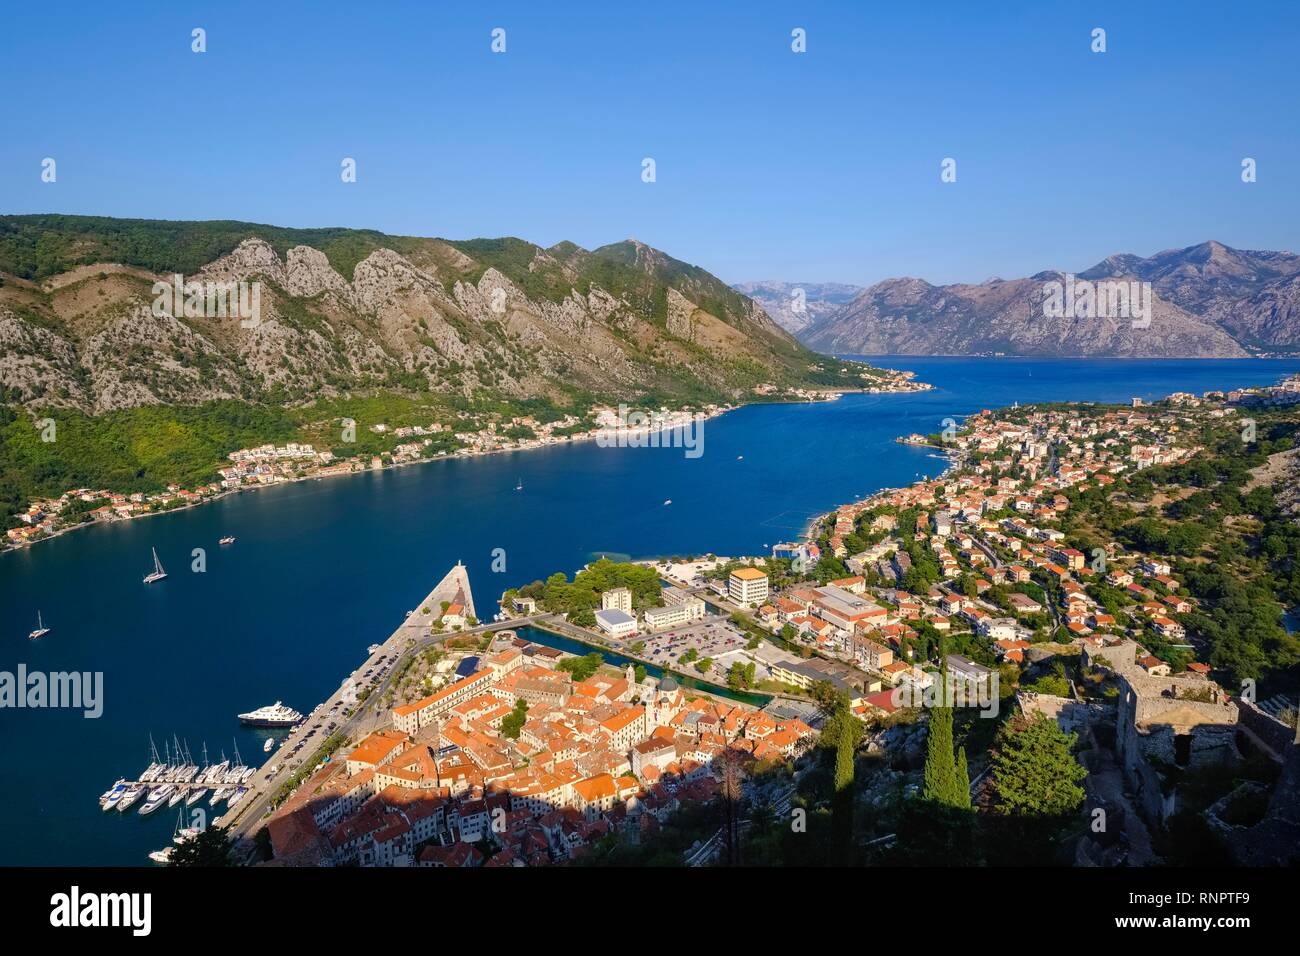 Old town of Kotor and Dobrota, view from fortress Sveti Ivan, bay of Kotor, Montenegro Stock Photo